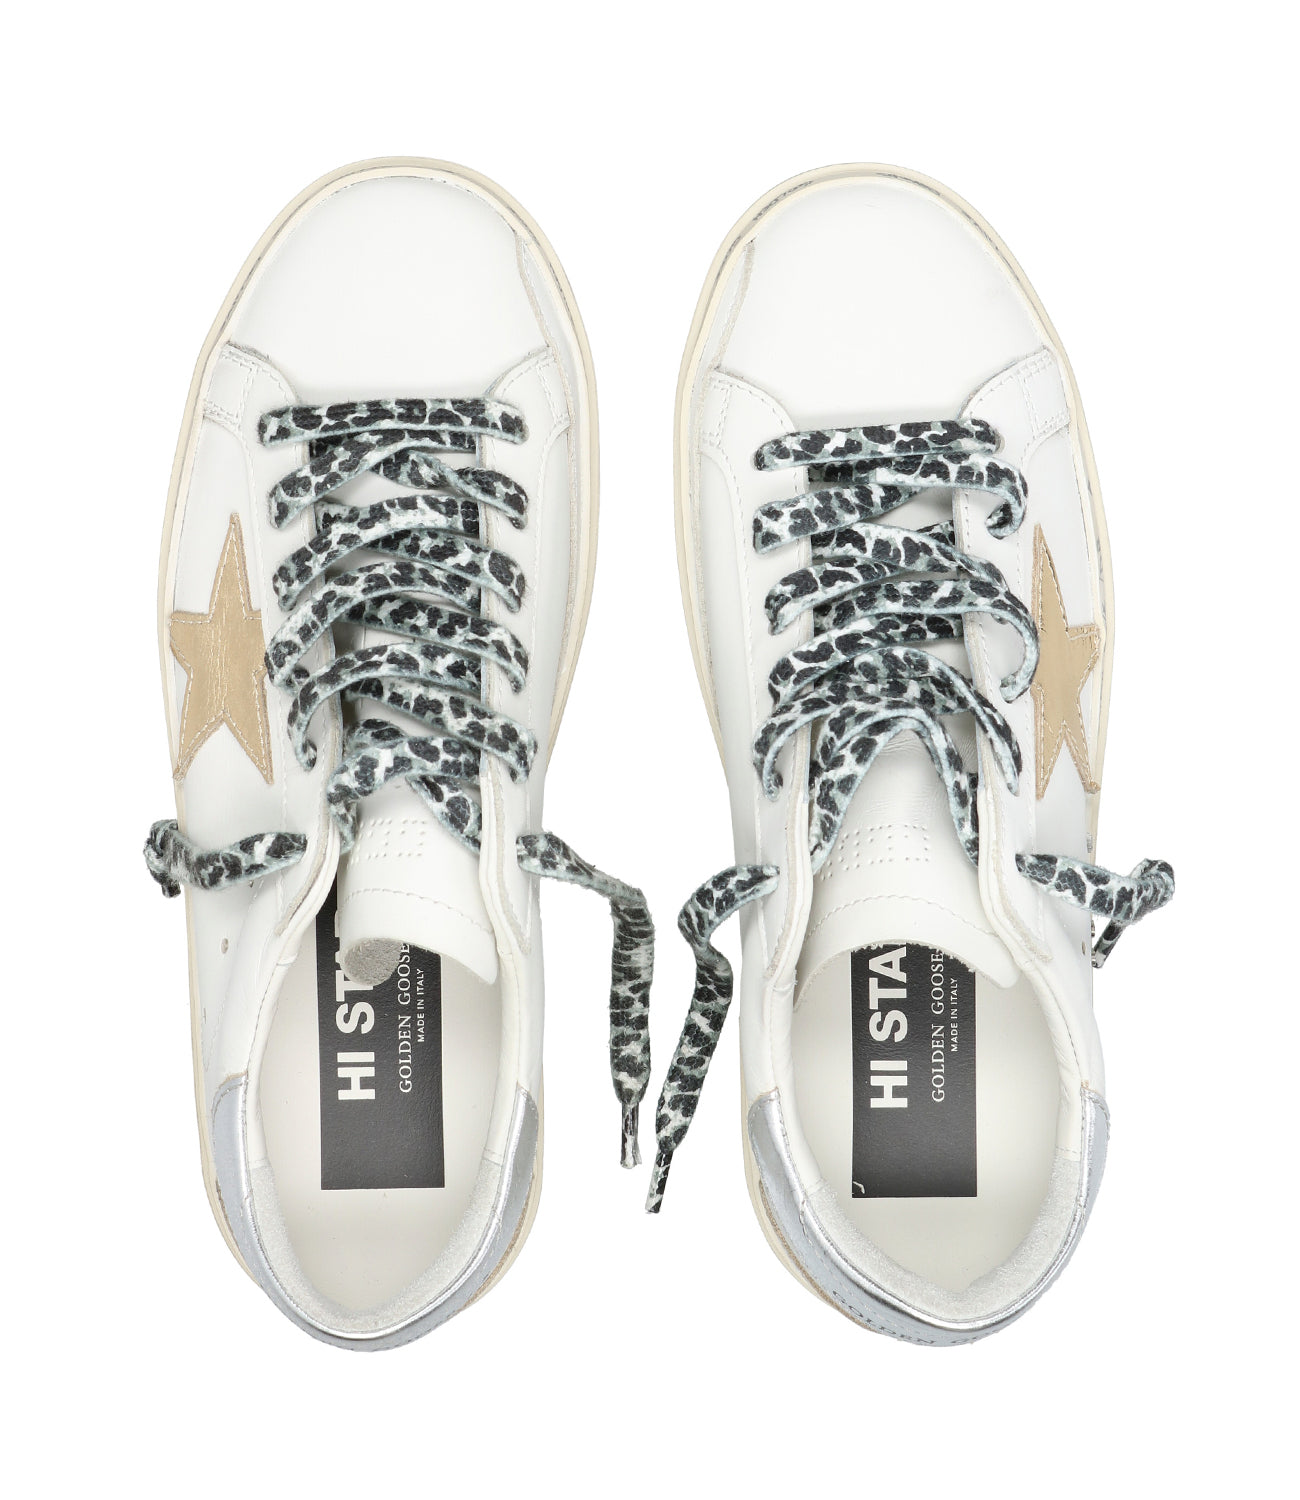 Golden Goose | White and Silver Superstar Sneakers